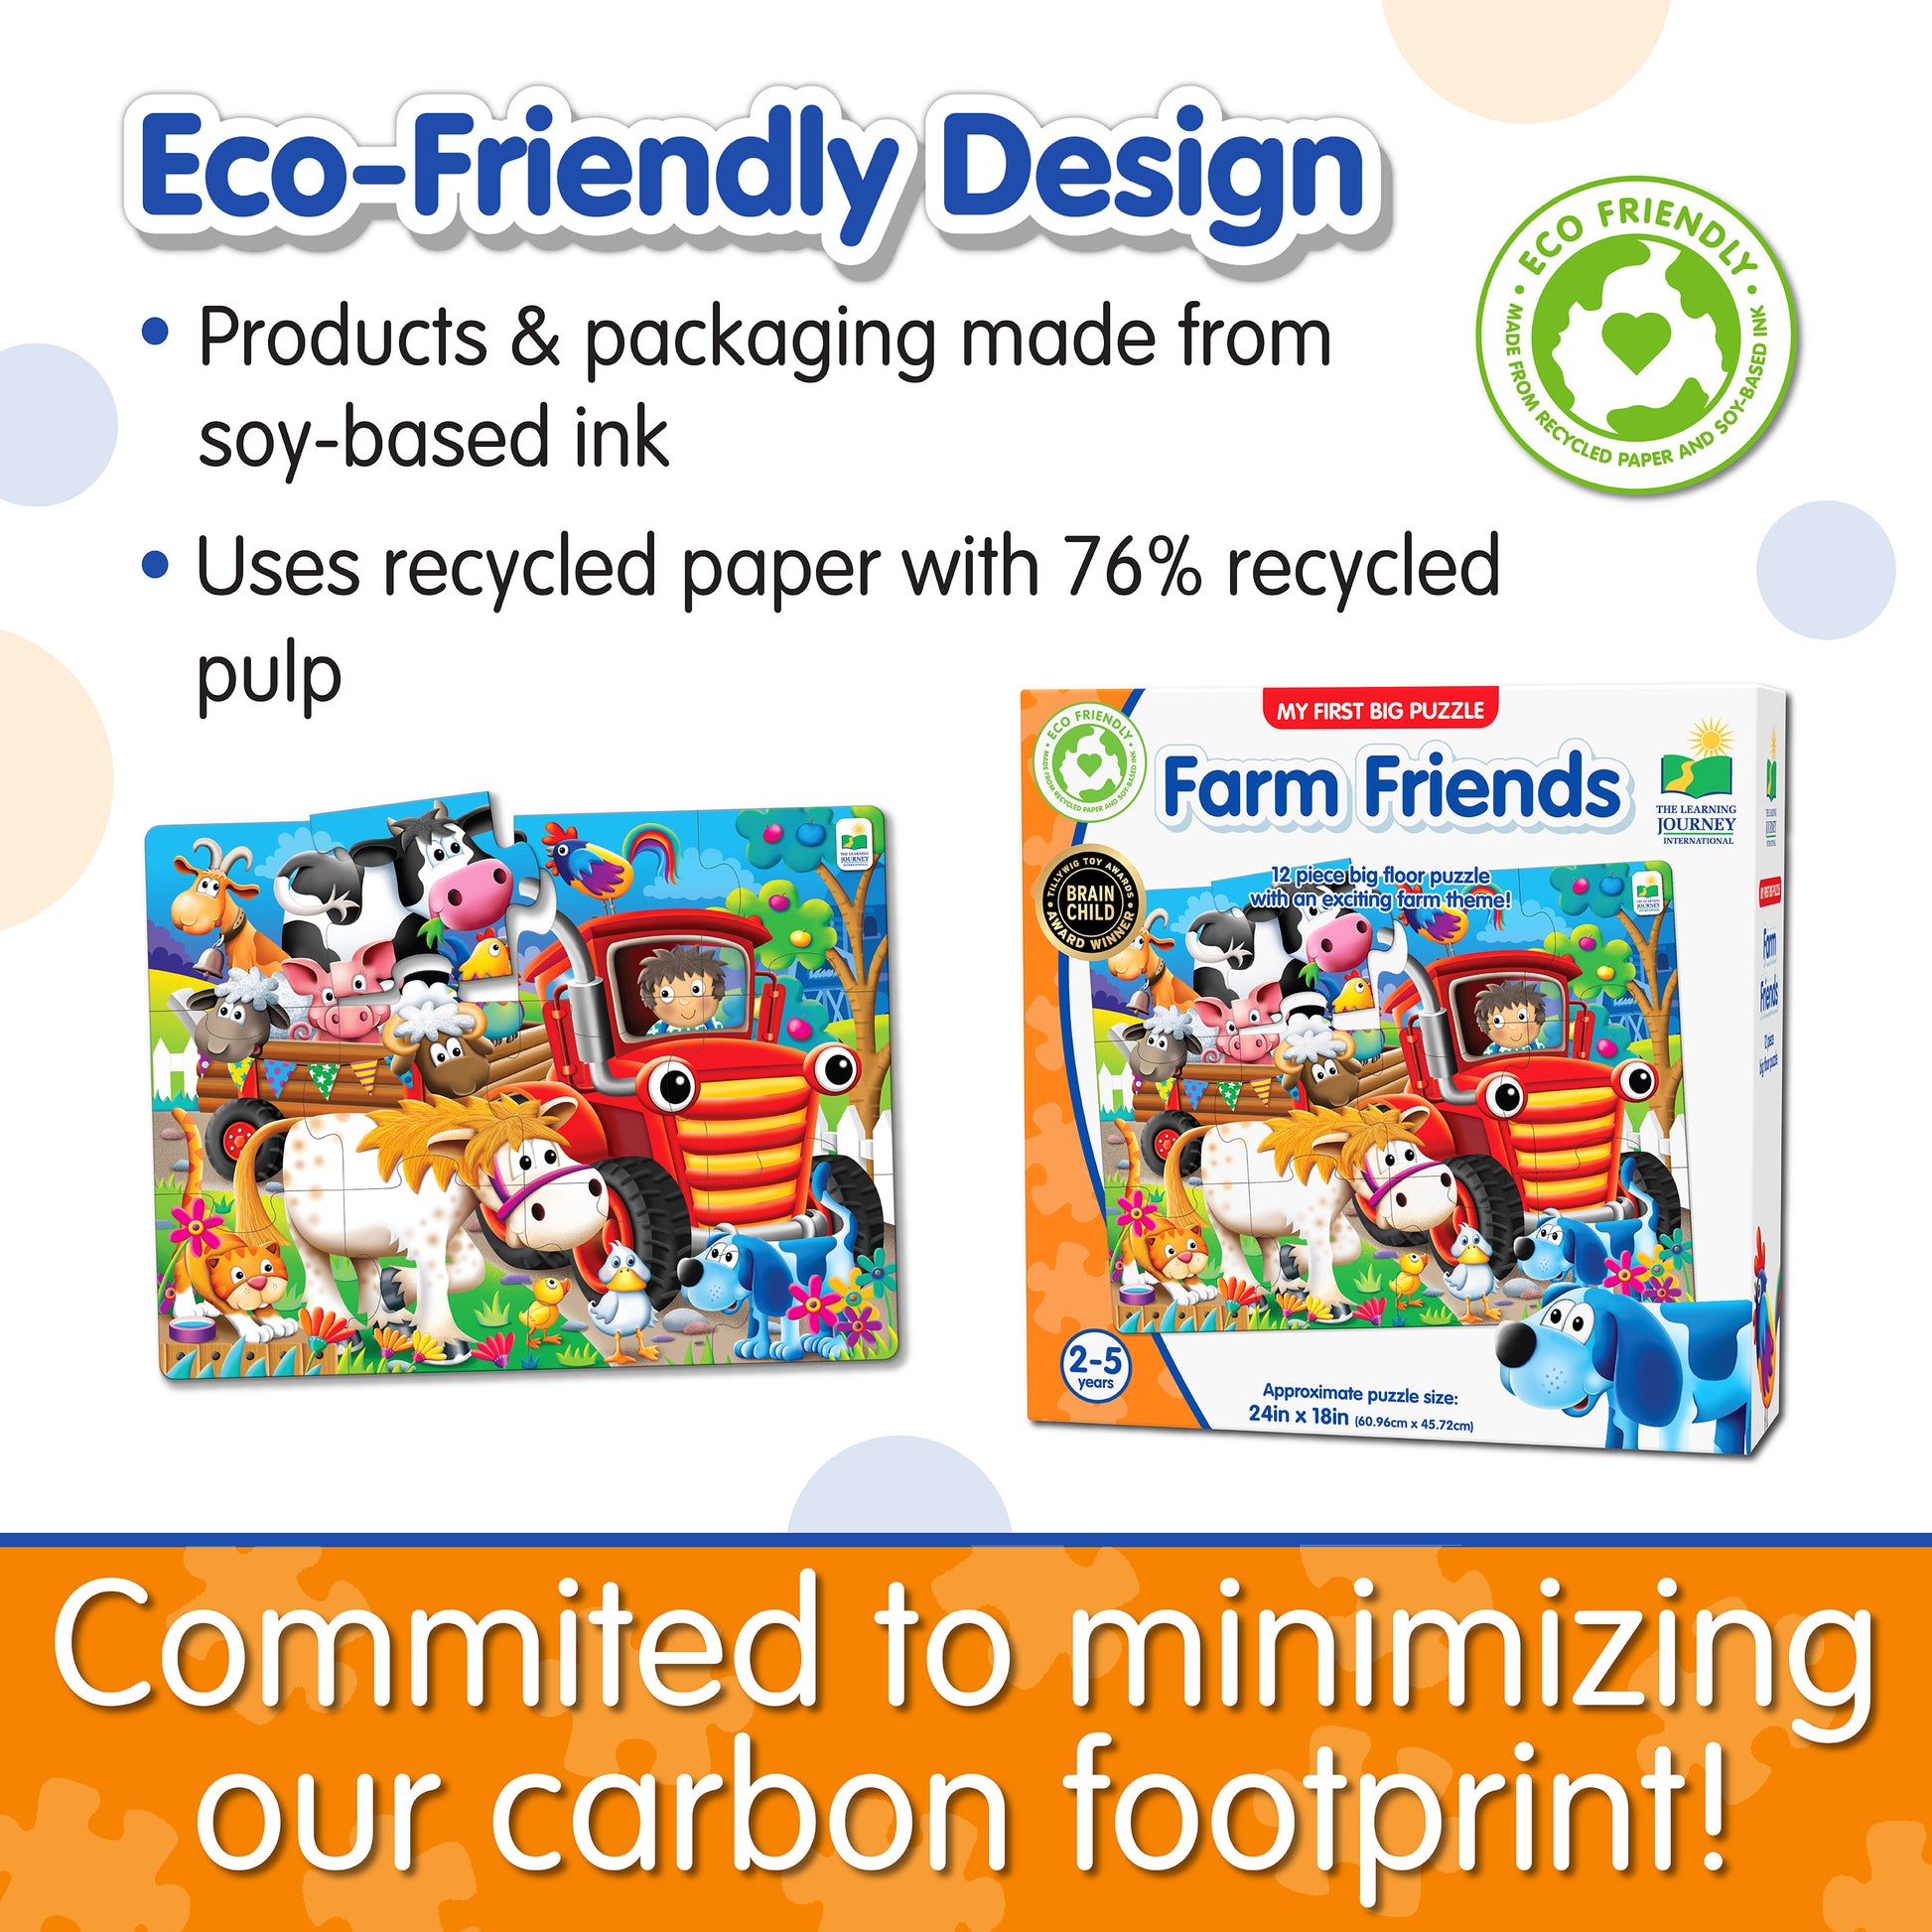 Infographic about My First Big Puzzle - Farm Friends' eco-friendly design that says, "Committed to minimizing our carbon footprint!"